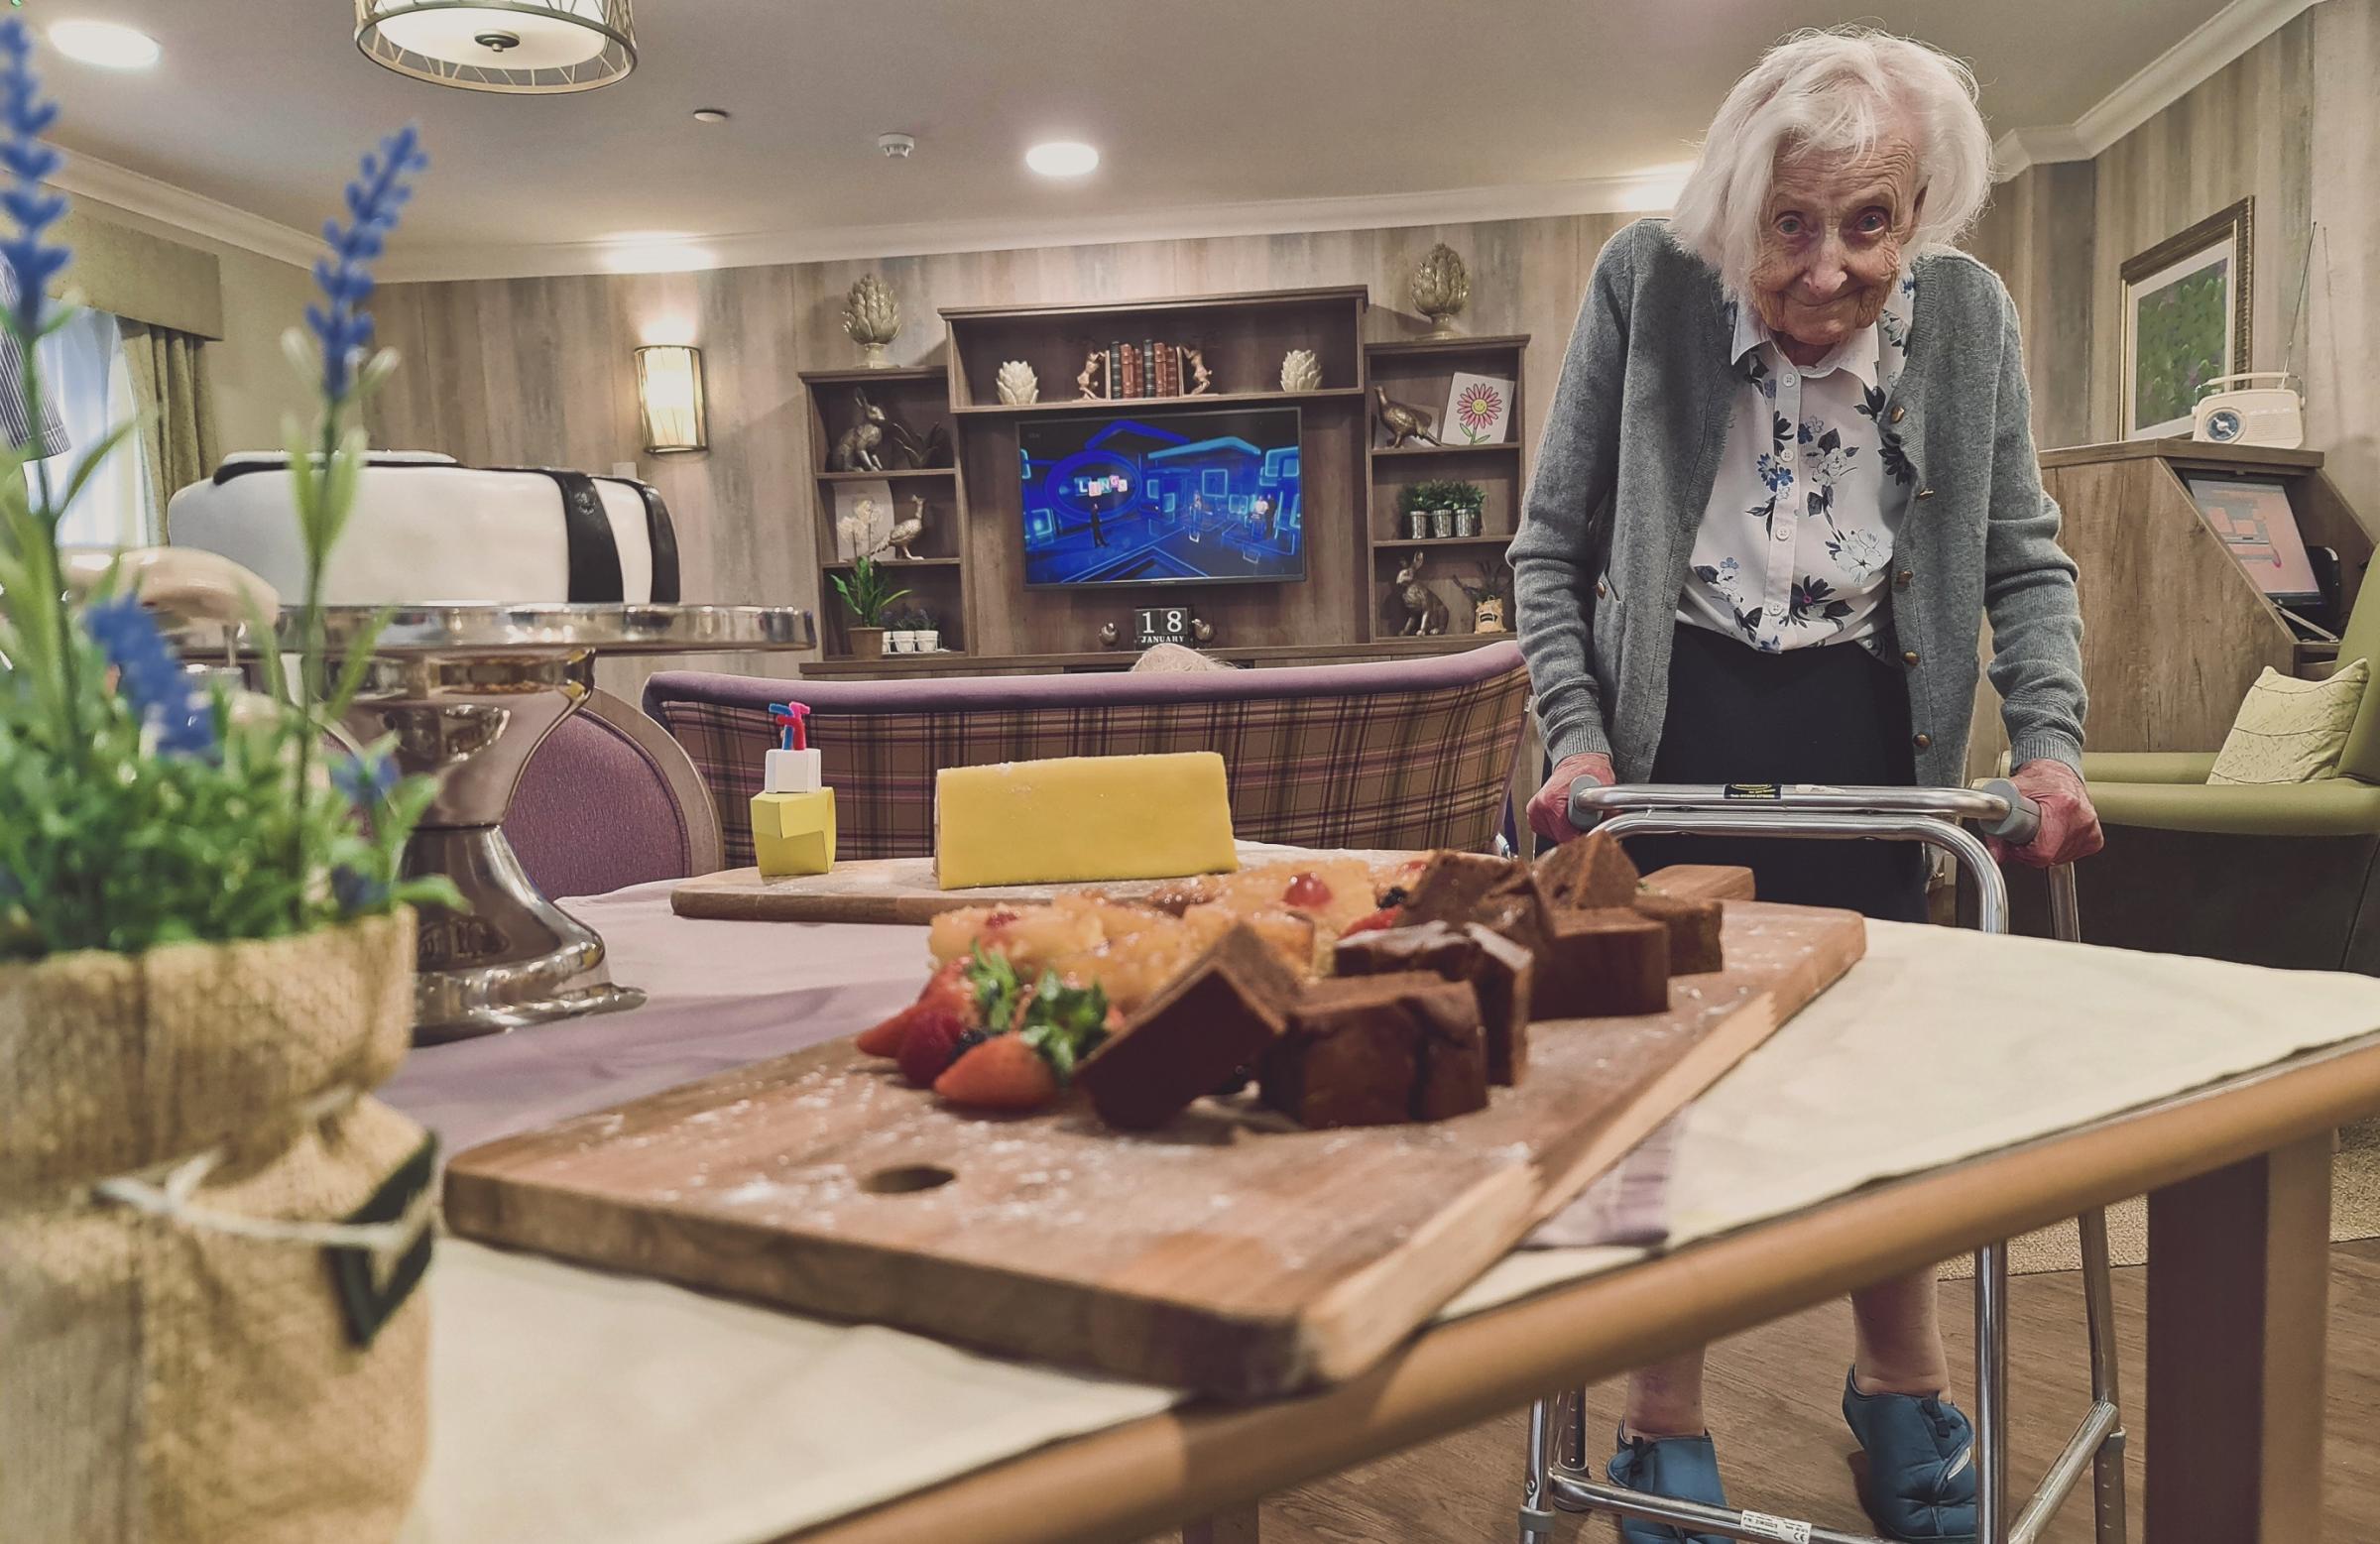 Deewater Grange care home residents enjoyed the Beatles mania-themed day as part of a nationwide initiative to rediscover favourite foods of the past.